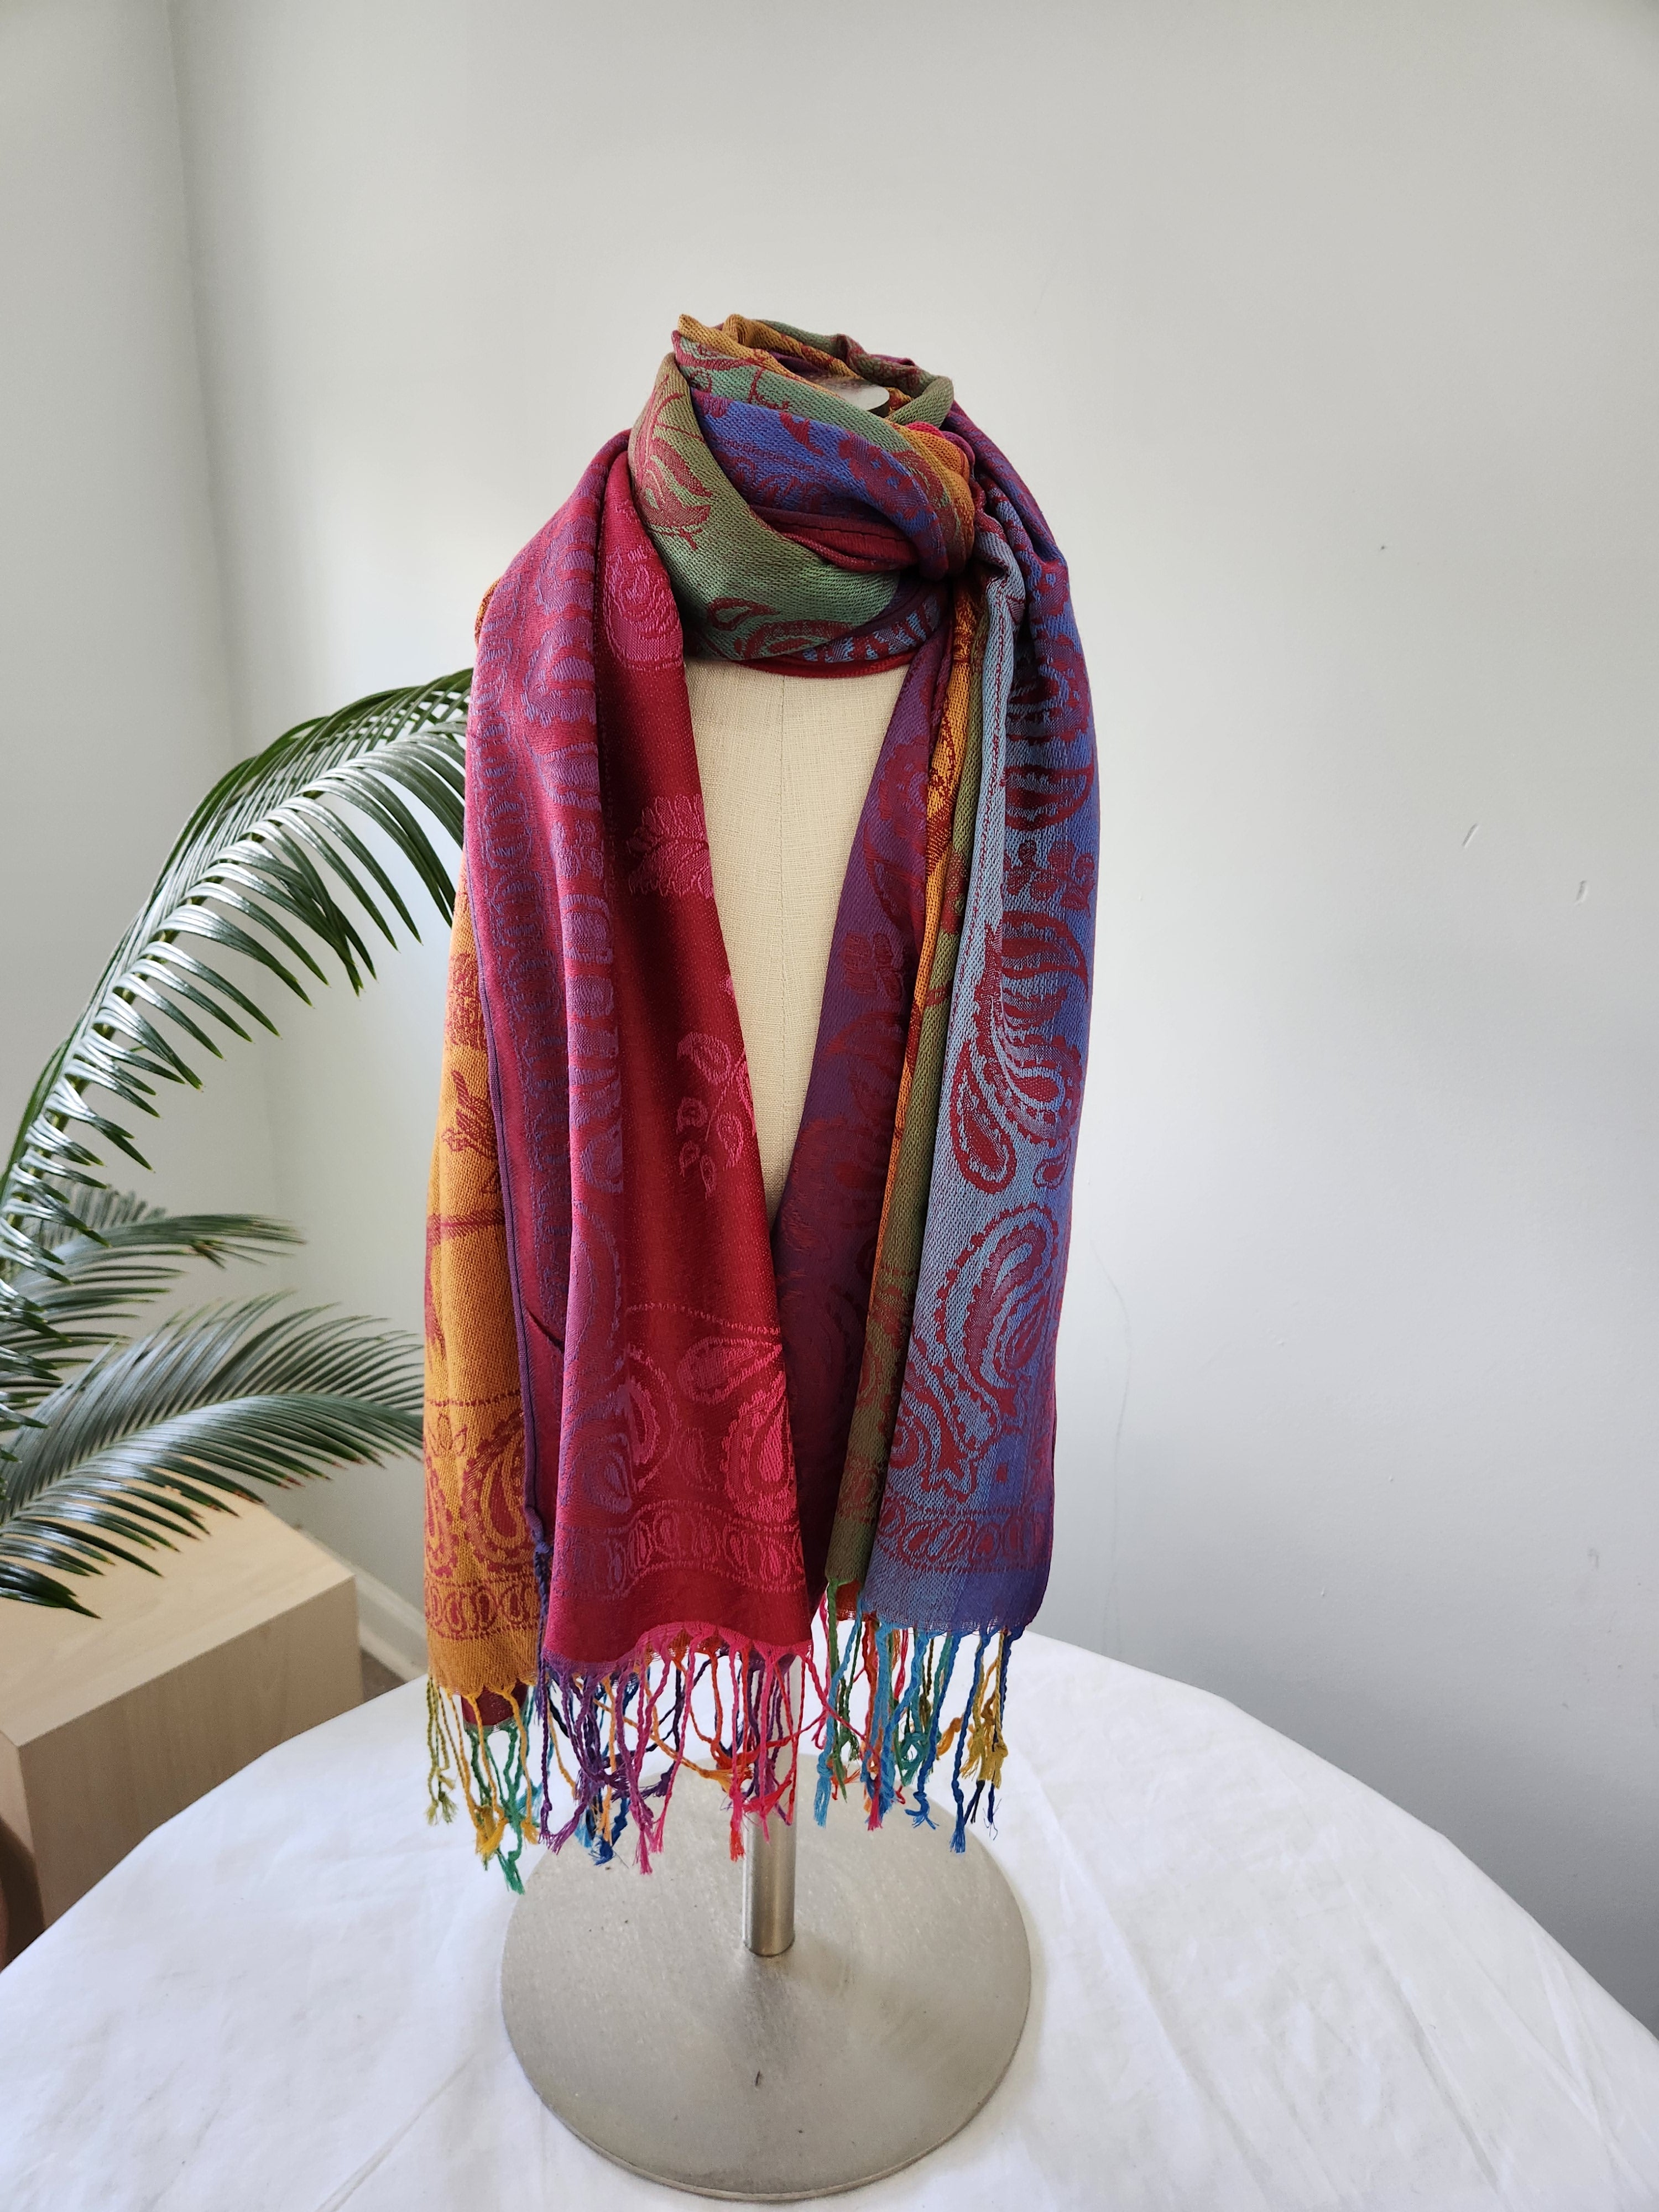 Women's Elegant Scarf or Wrap, Colorful Jewel-Tones, Great Gift for Holidays